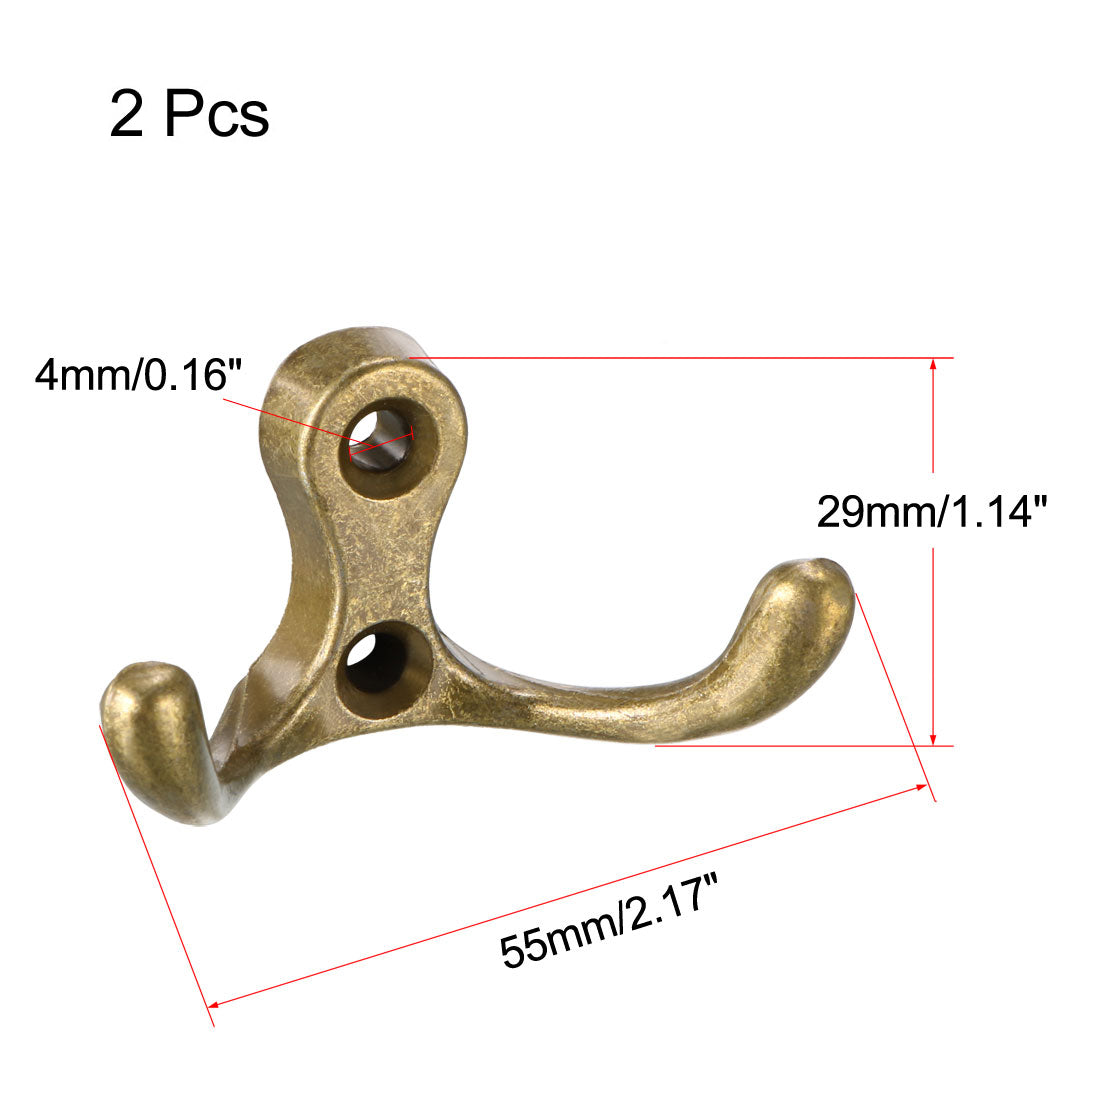 uxcell Uxcell Dual Prong Coat Hooks Wall Mounted Retro Double Hooks Utility Antique Bronze Hook for Coat Scarf Bag Towel Key Cap Cup Hat 30mm x 55mm x 29mm 2pcs